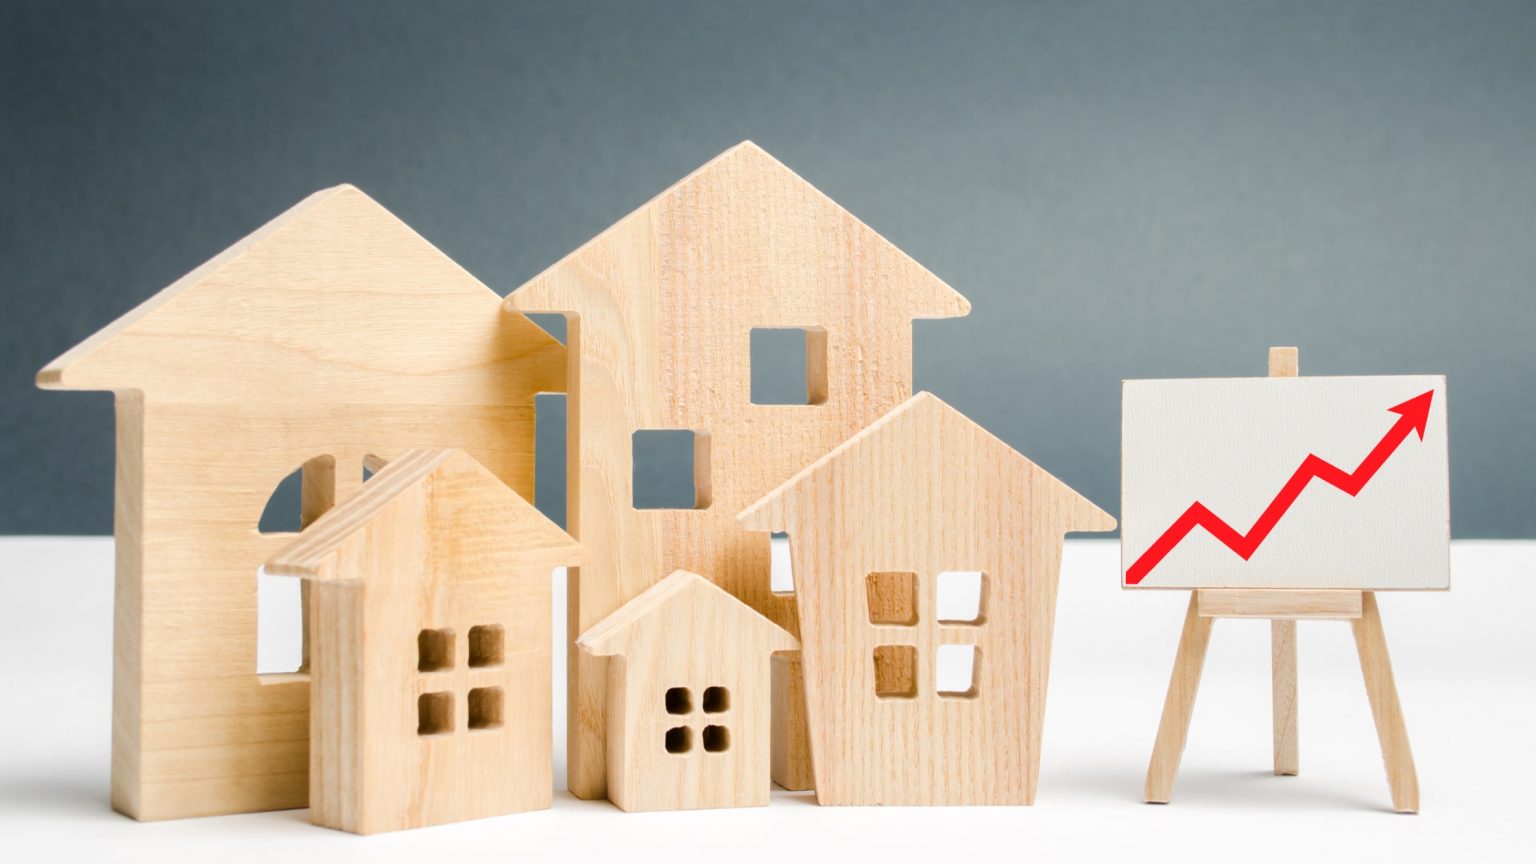 House price increases, chart showing up arrow next to wooden home figurines.